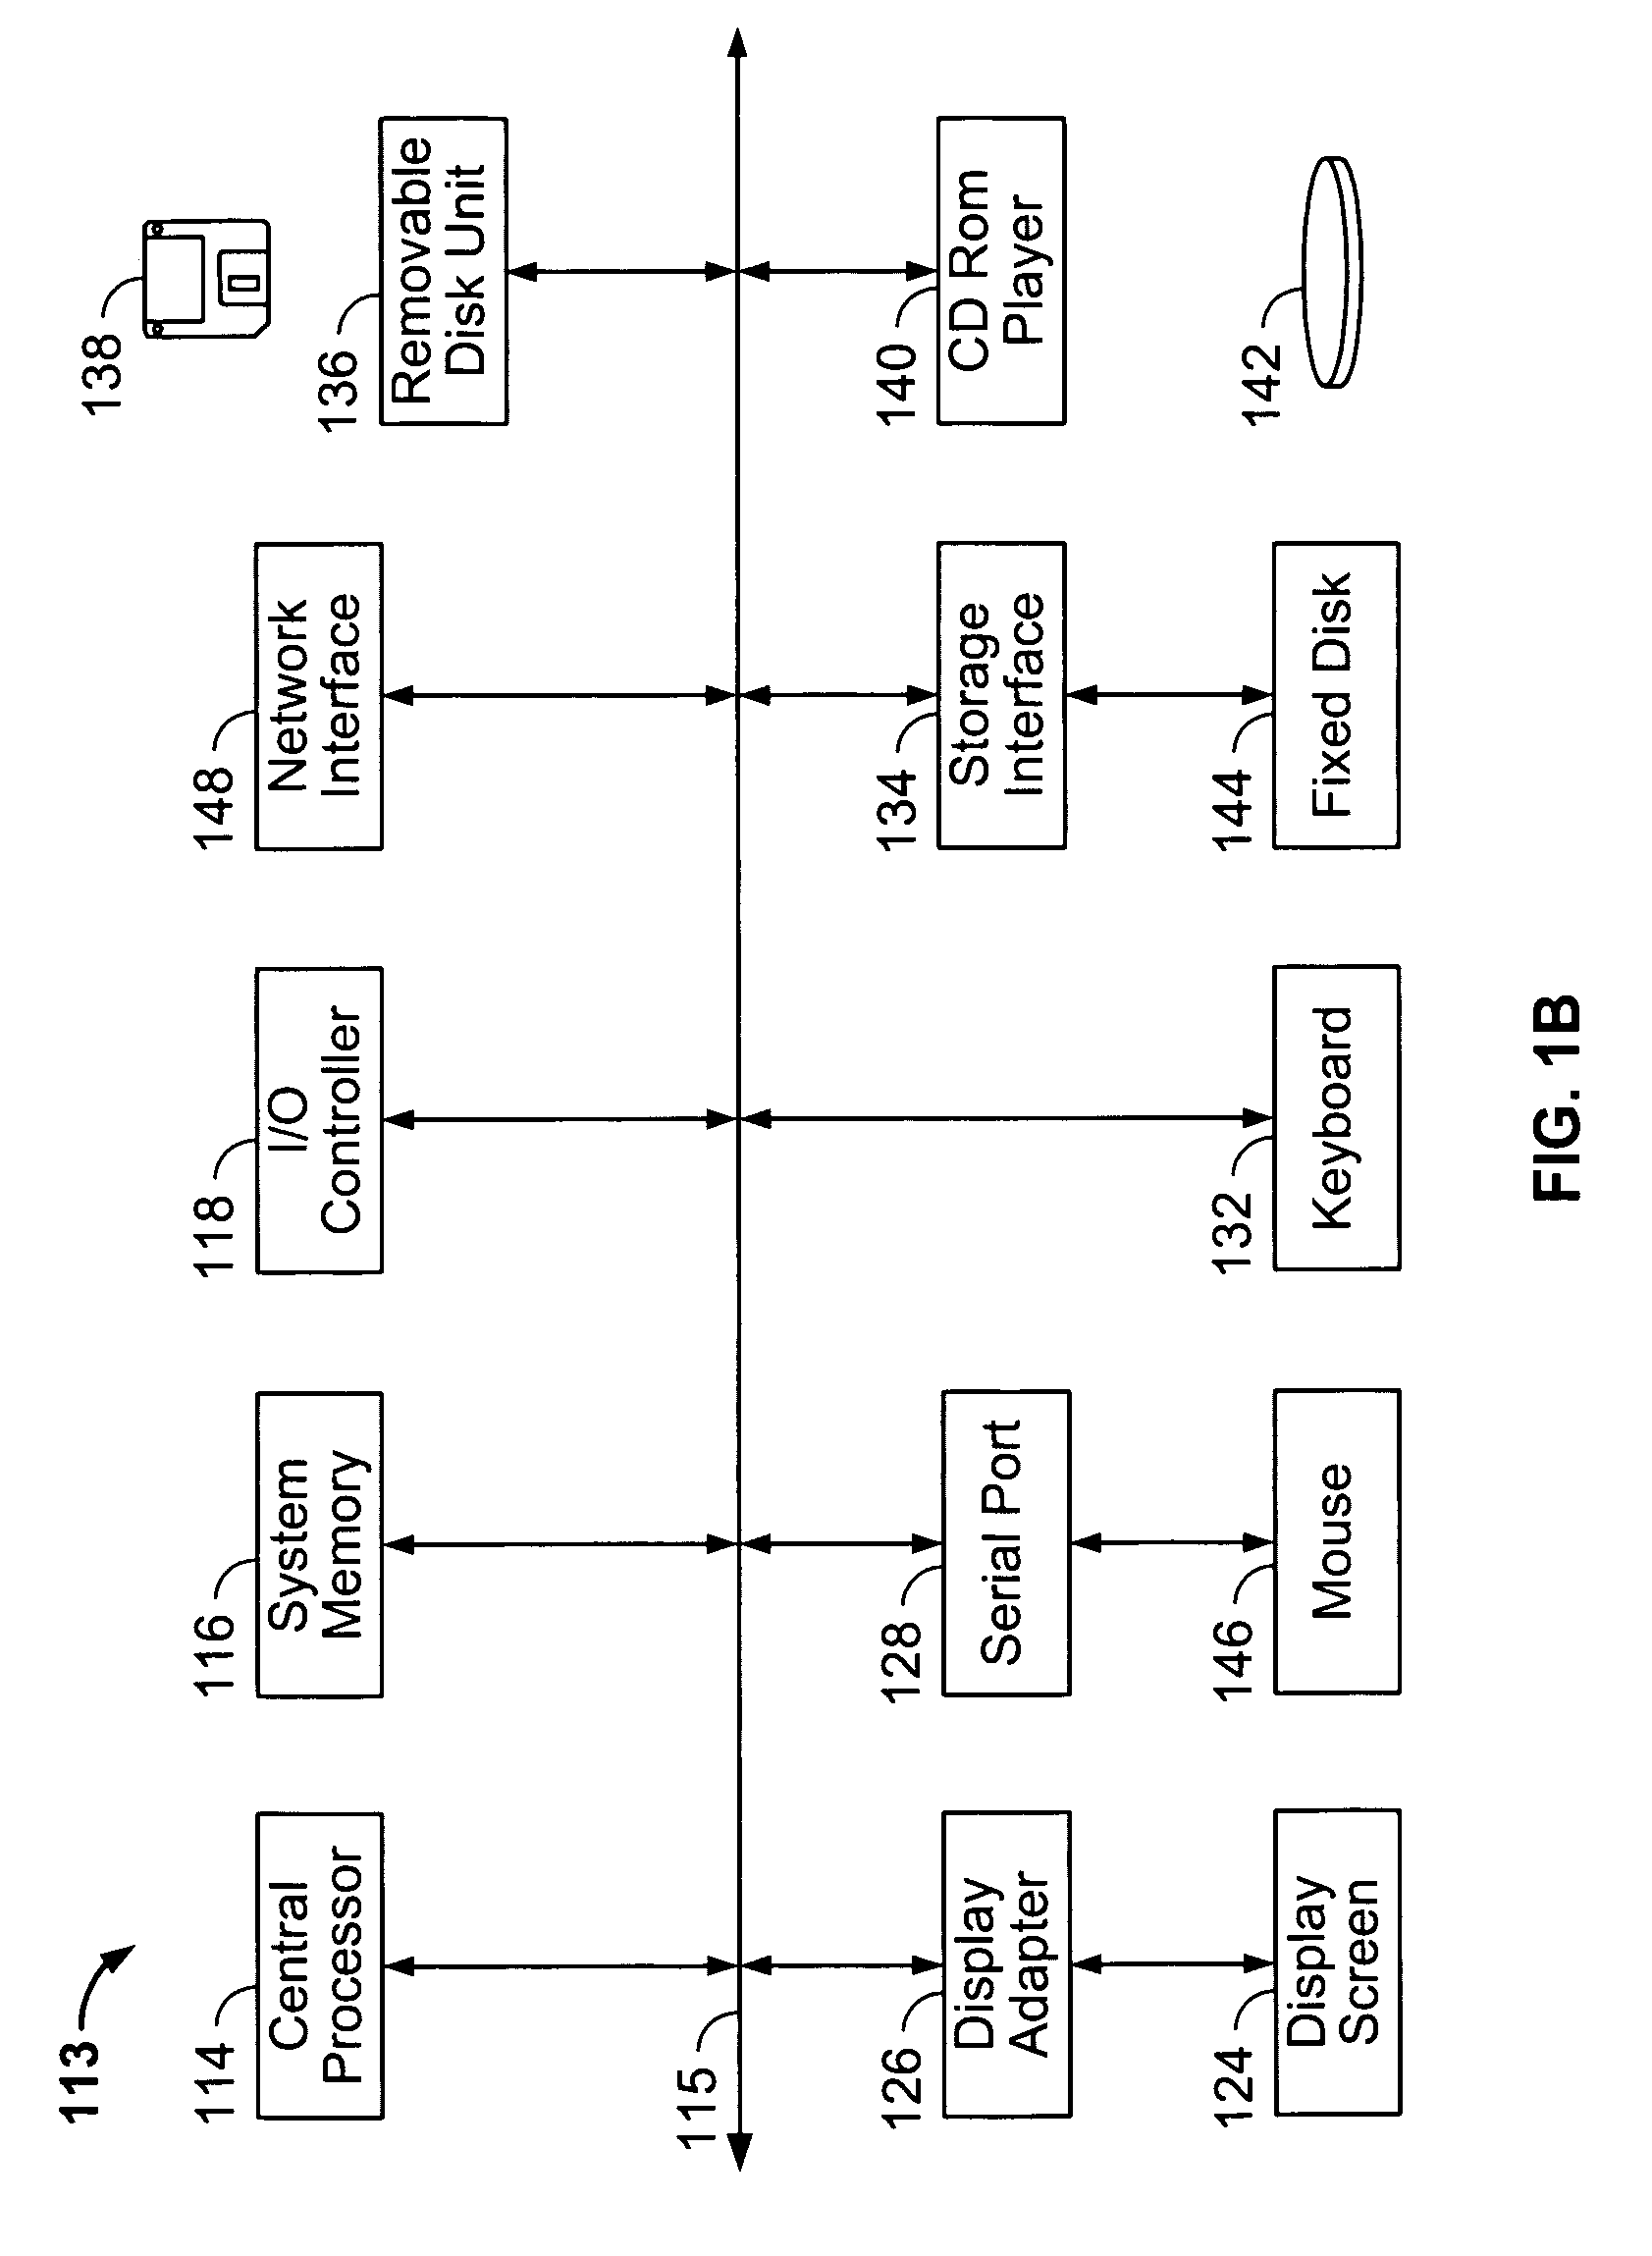 Method for visualizing information in a data warehousing environment